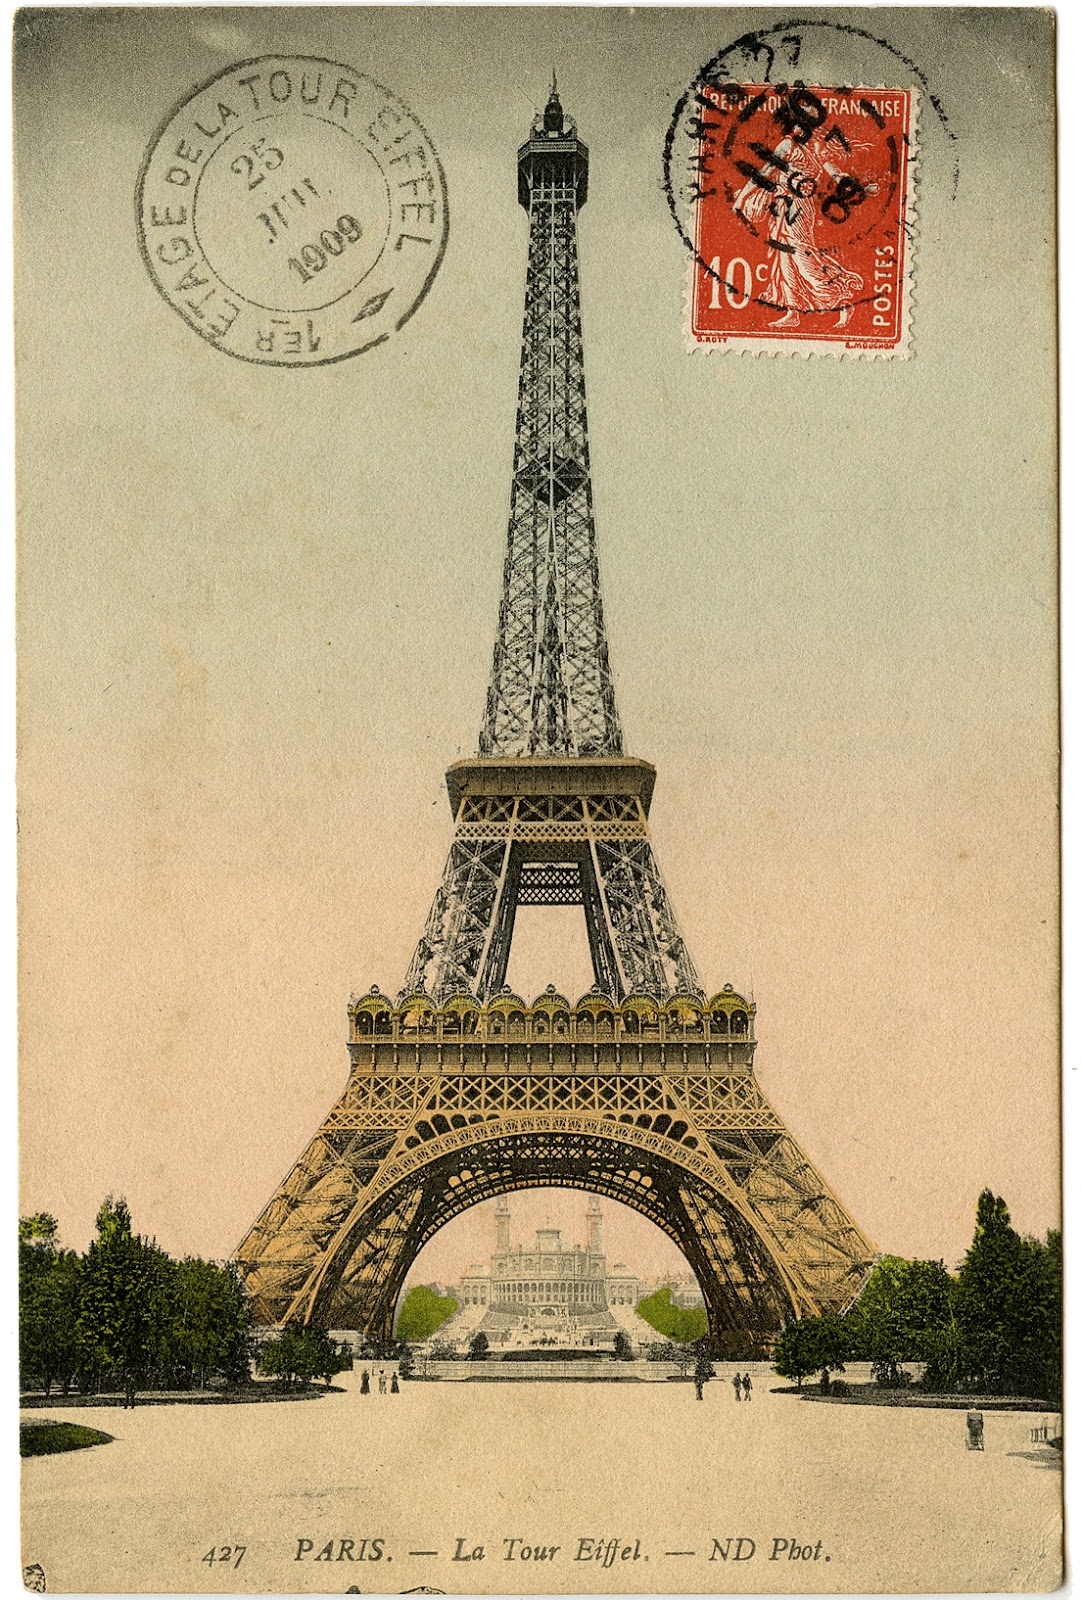 Vintage Image - Eiffel Tower Photo and Postmark - The Graphics Fairy